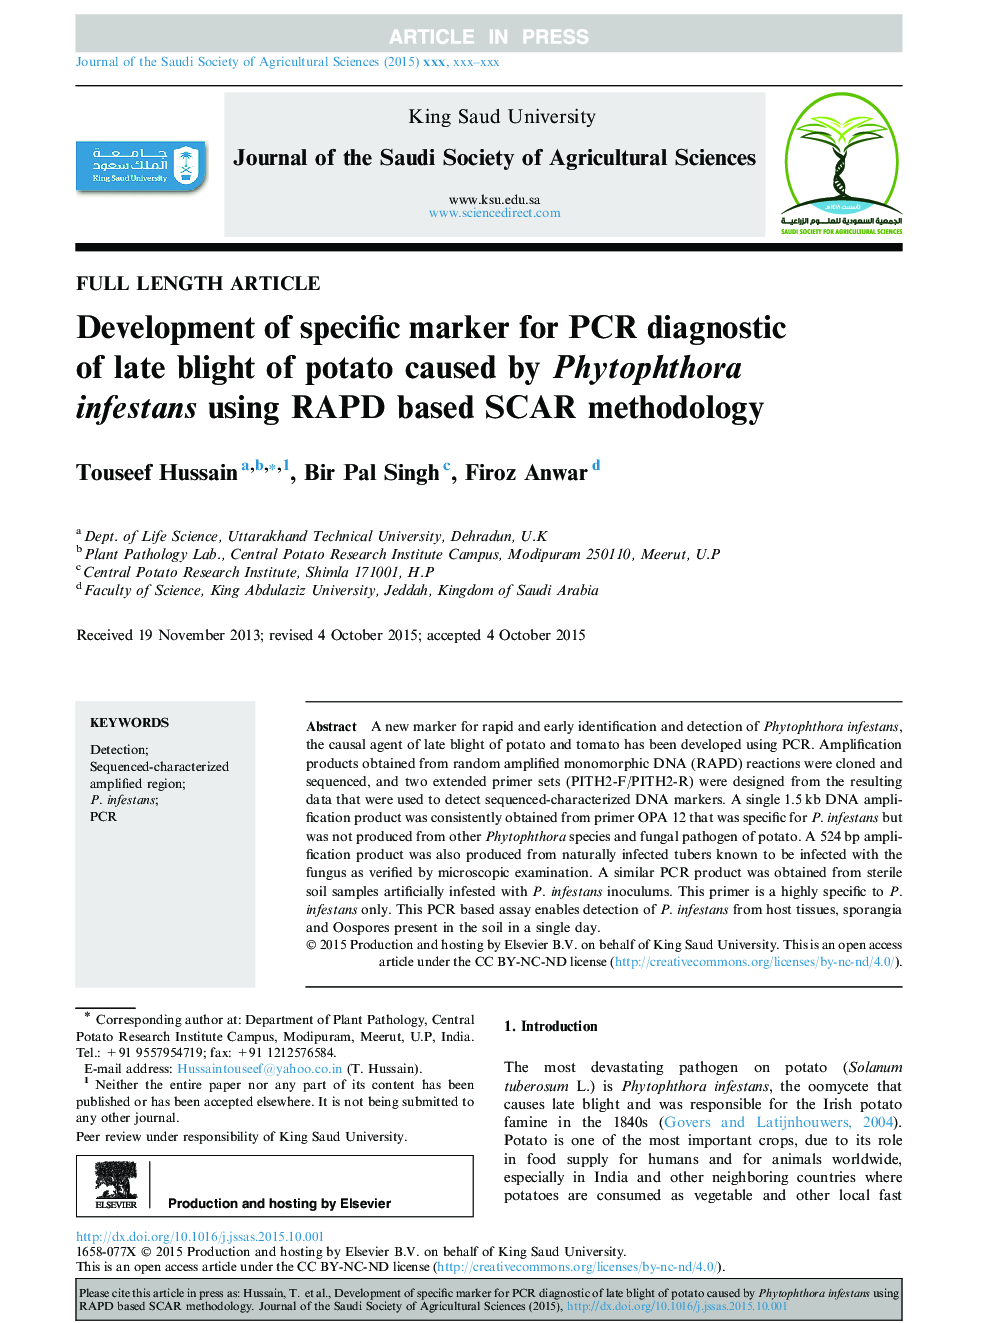 Development of specific marker for PCR diagnostic of late blight of potato caused by Phytophthora infestans using RAPD based SCAR methodology